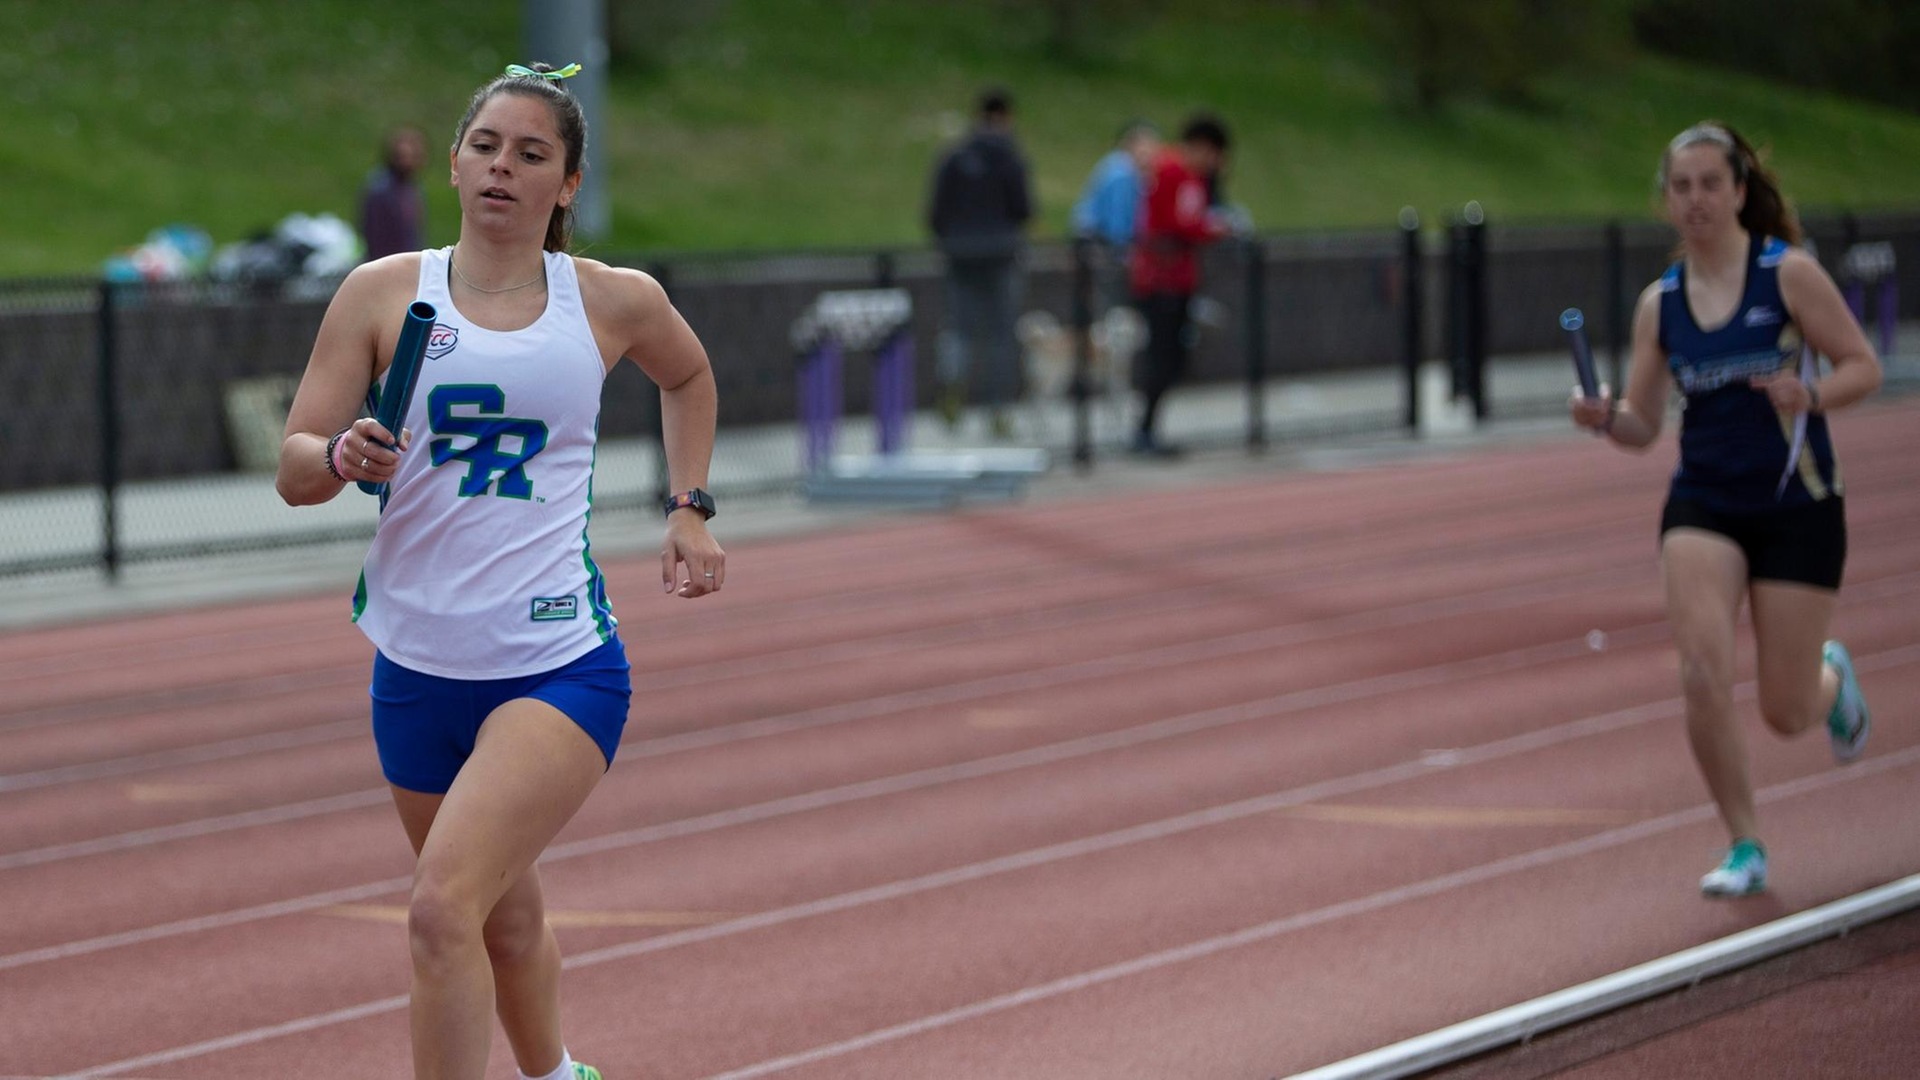 Seahawks spring to action at Regis Spring Classic